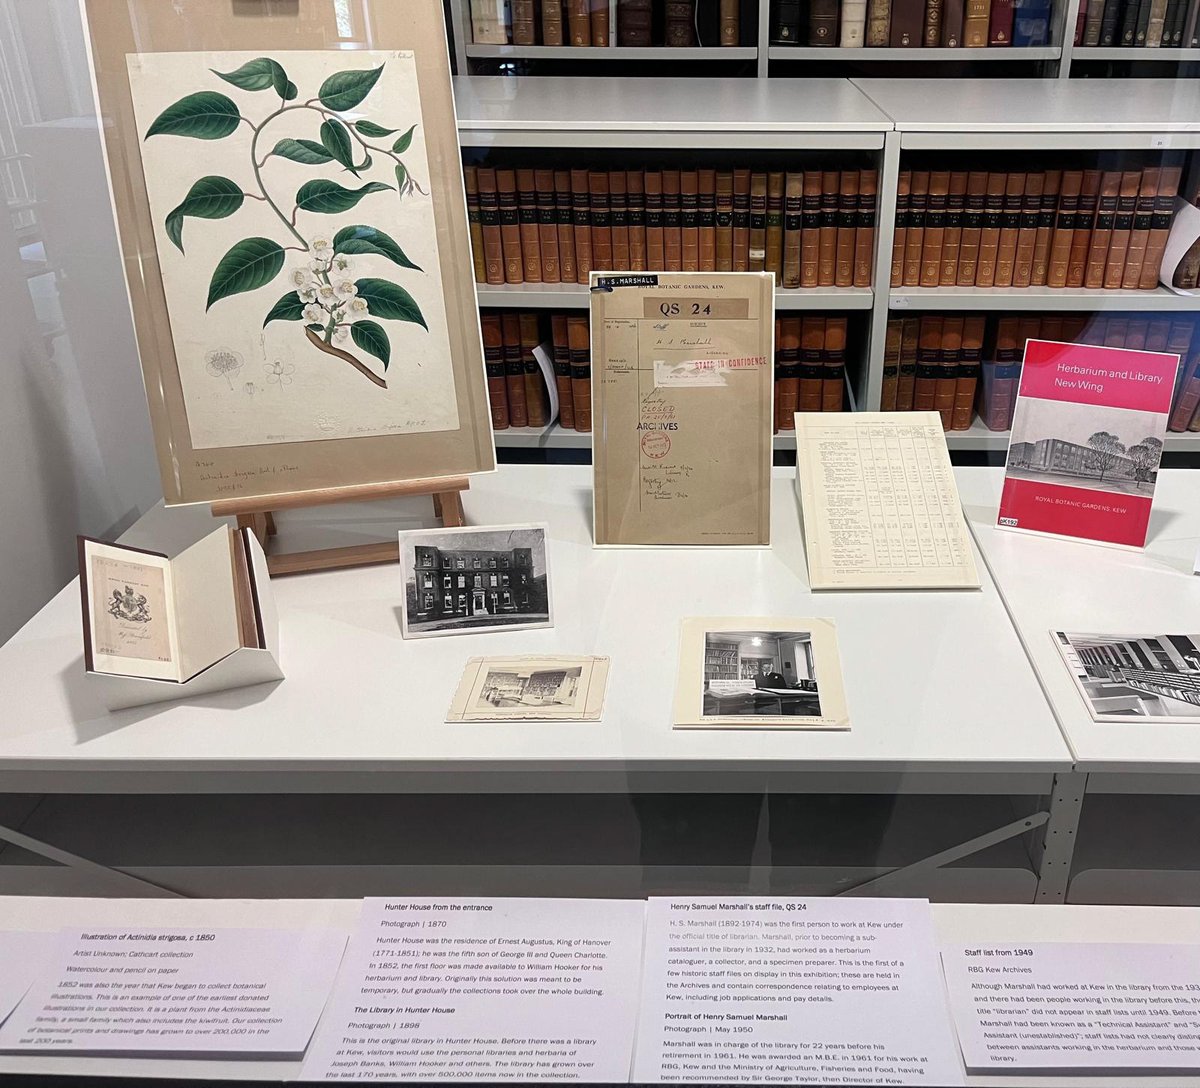 Our new display, Leafy Legacies, has just opened! It explores staff histories preserved within the Library & Archives collections (Tues - Thurs 10.00 - 4.00). Learn some of the fascinating personal stories of those who have helped the organisation thrive over the past 200 years.